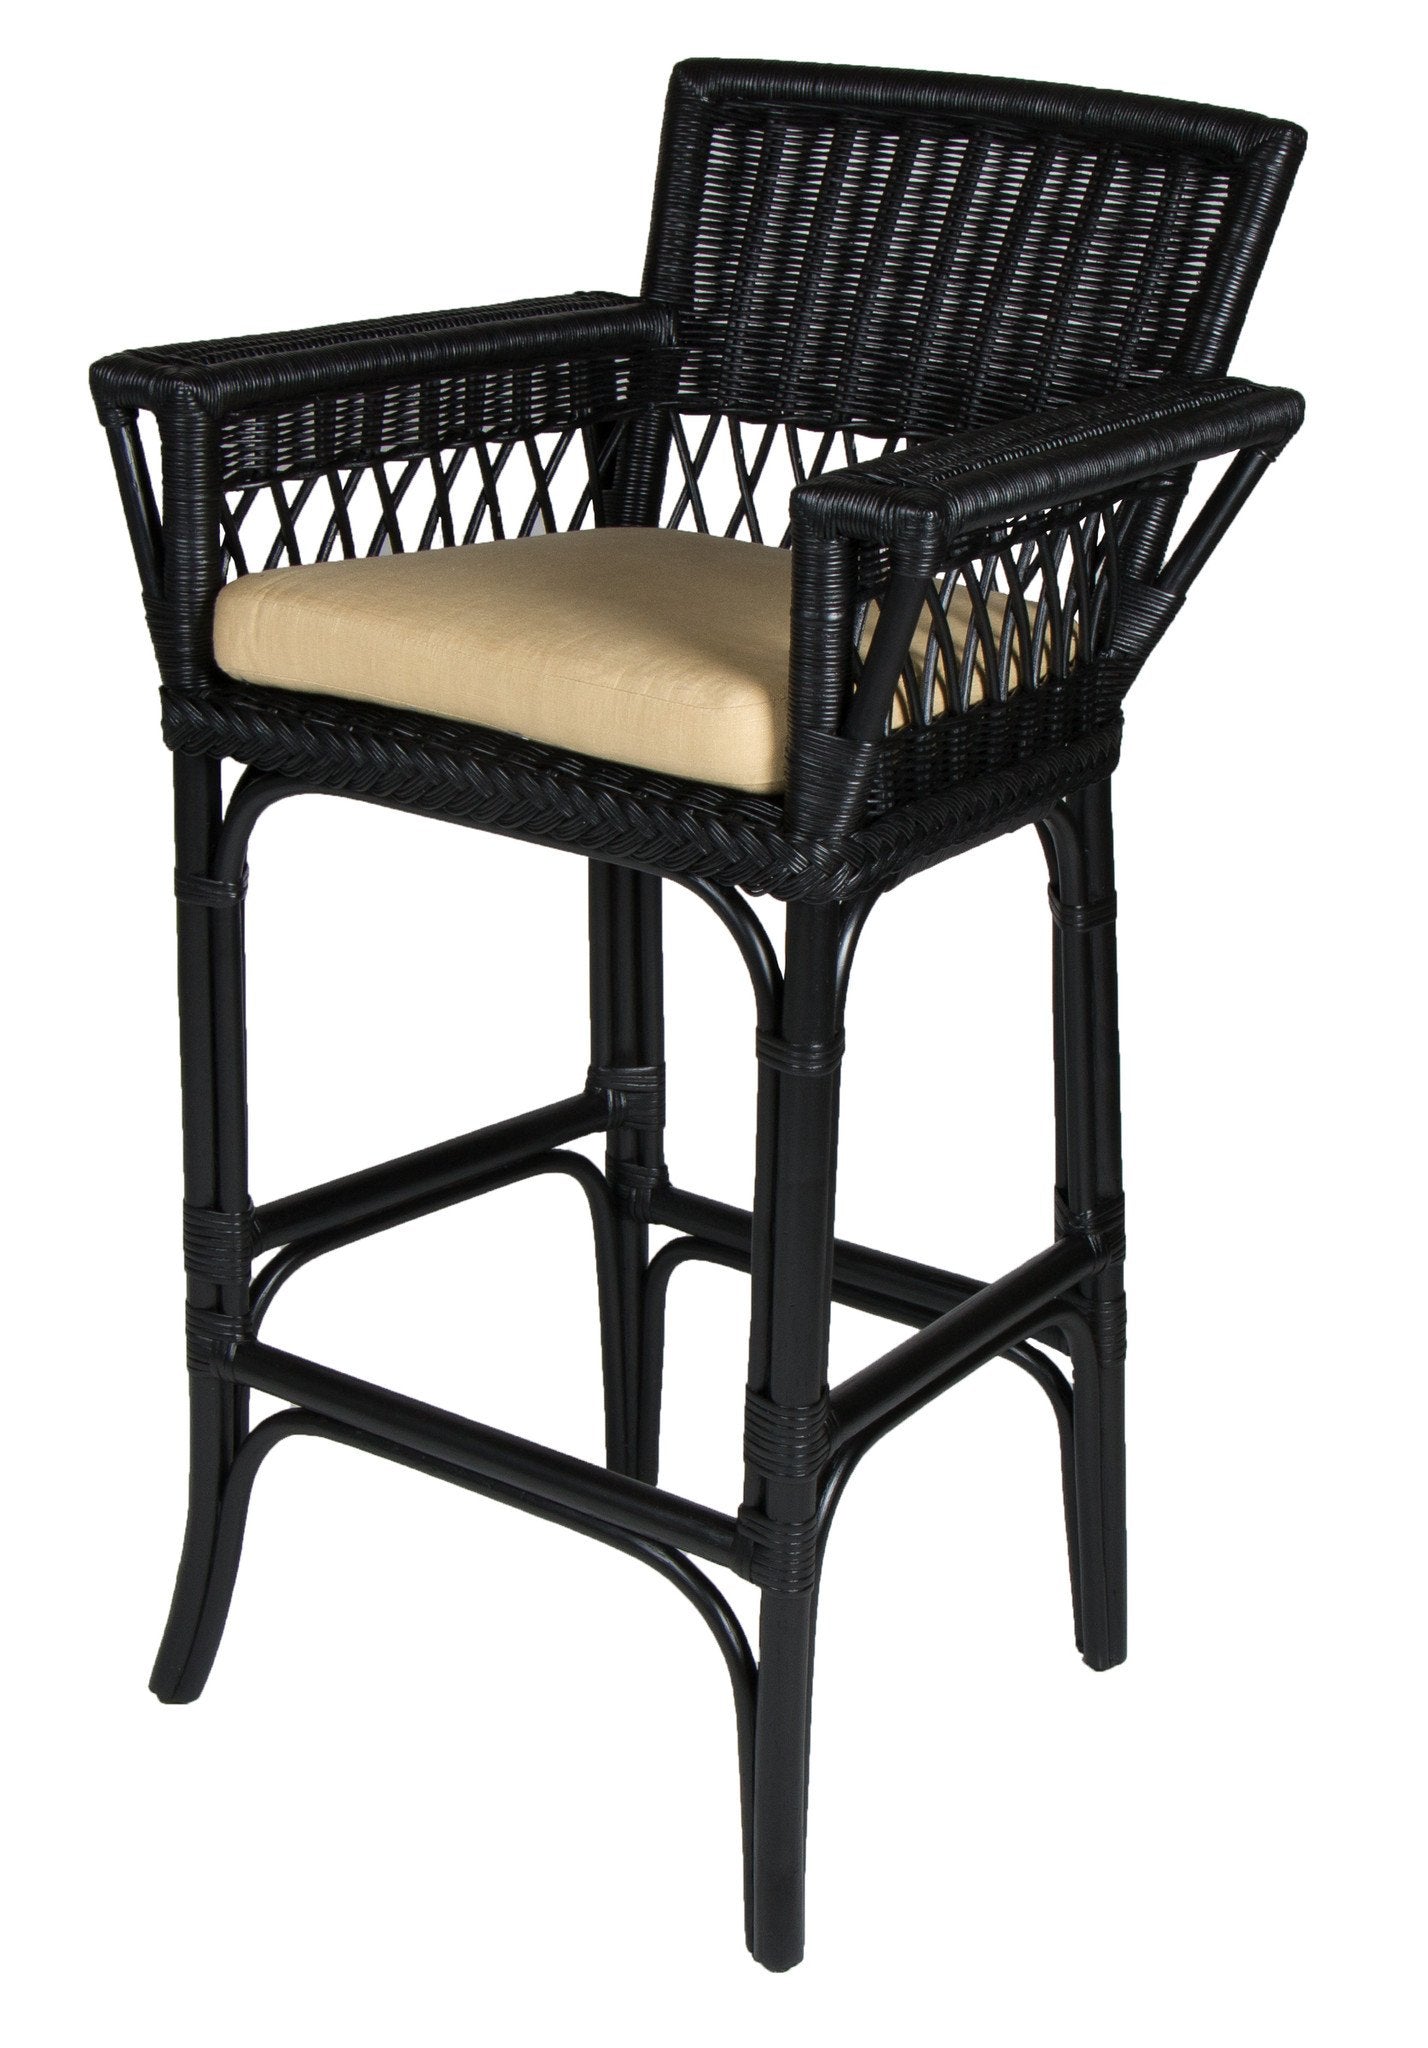 Designer Wicker & Rattan By Tribor Windsor Barstool Armless by Design Wicker from Tribor Bar Stool - Rattan Imports